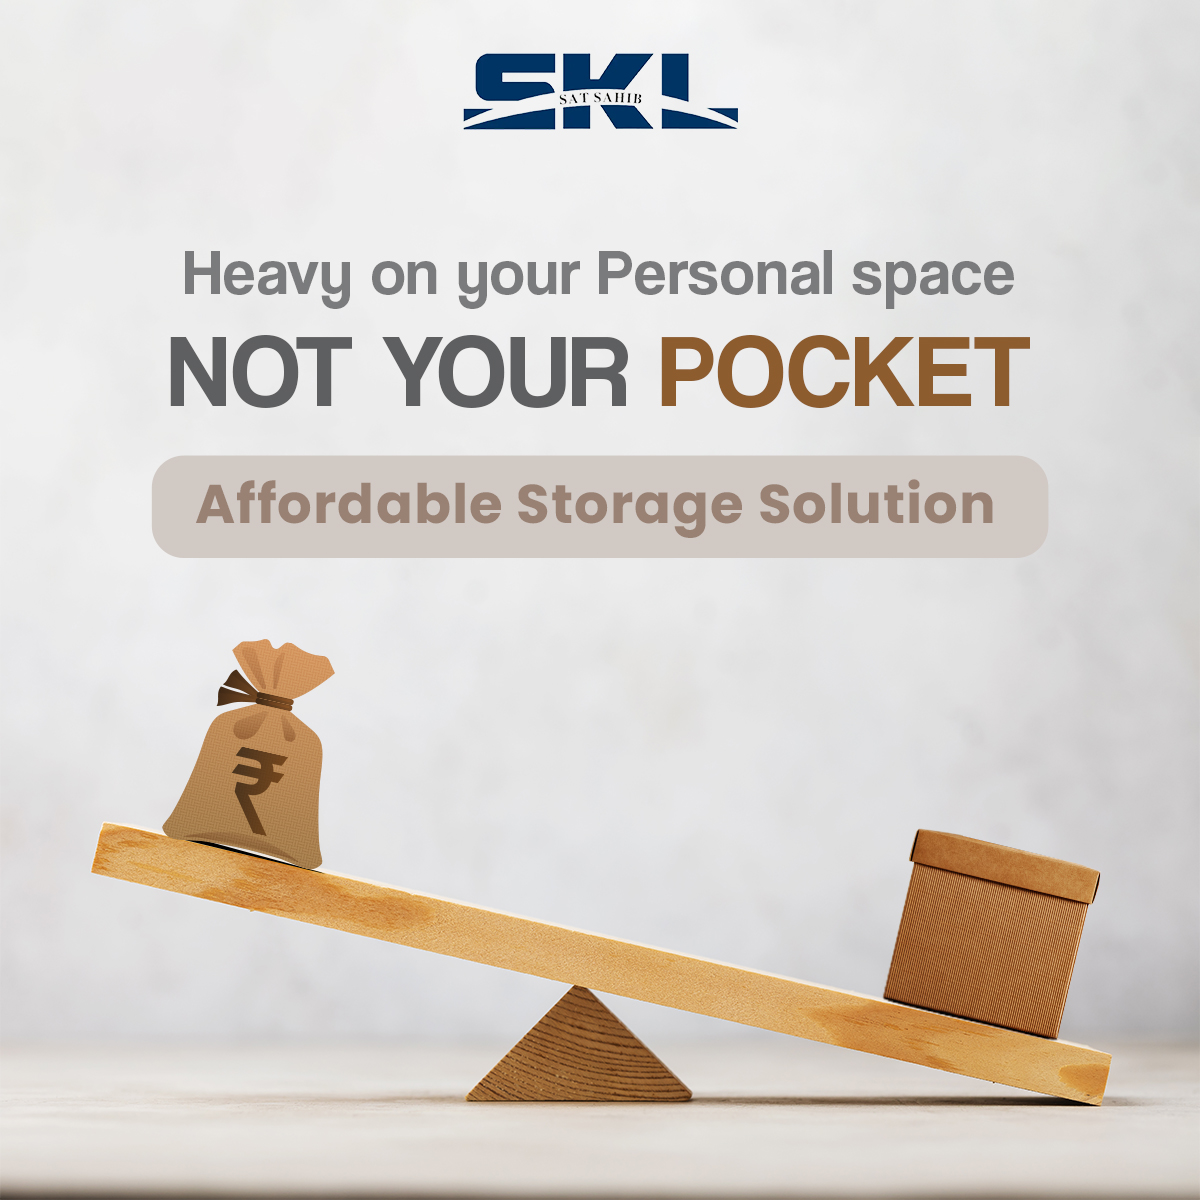 Our affordable solutions offer the space you need at prices you'll love. Say goodbye to sky-high storage costs and hello to affordability with our budget-friendly.
.
#satkabirlogistics #logistics #logisticssolutions #logisticservices #CostEfficient #LogisticsExcellence #sklgroup